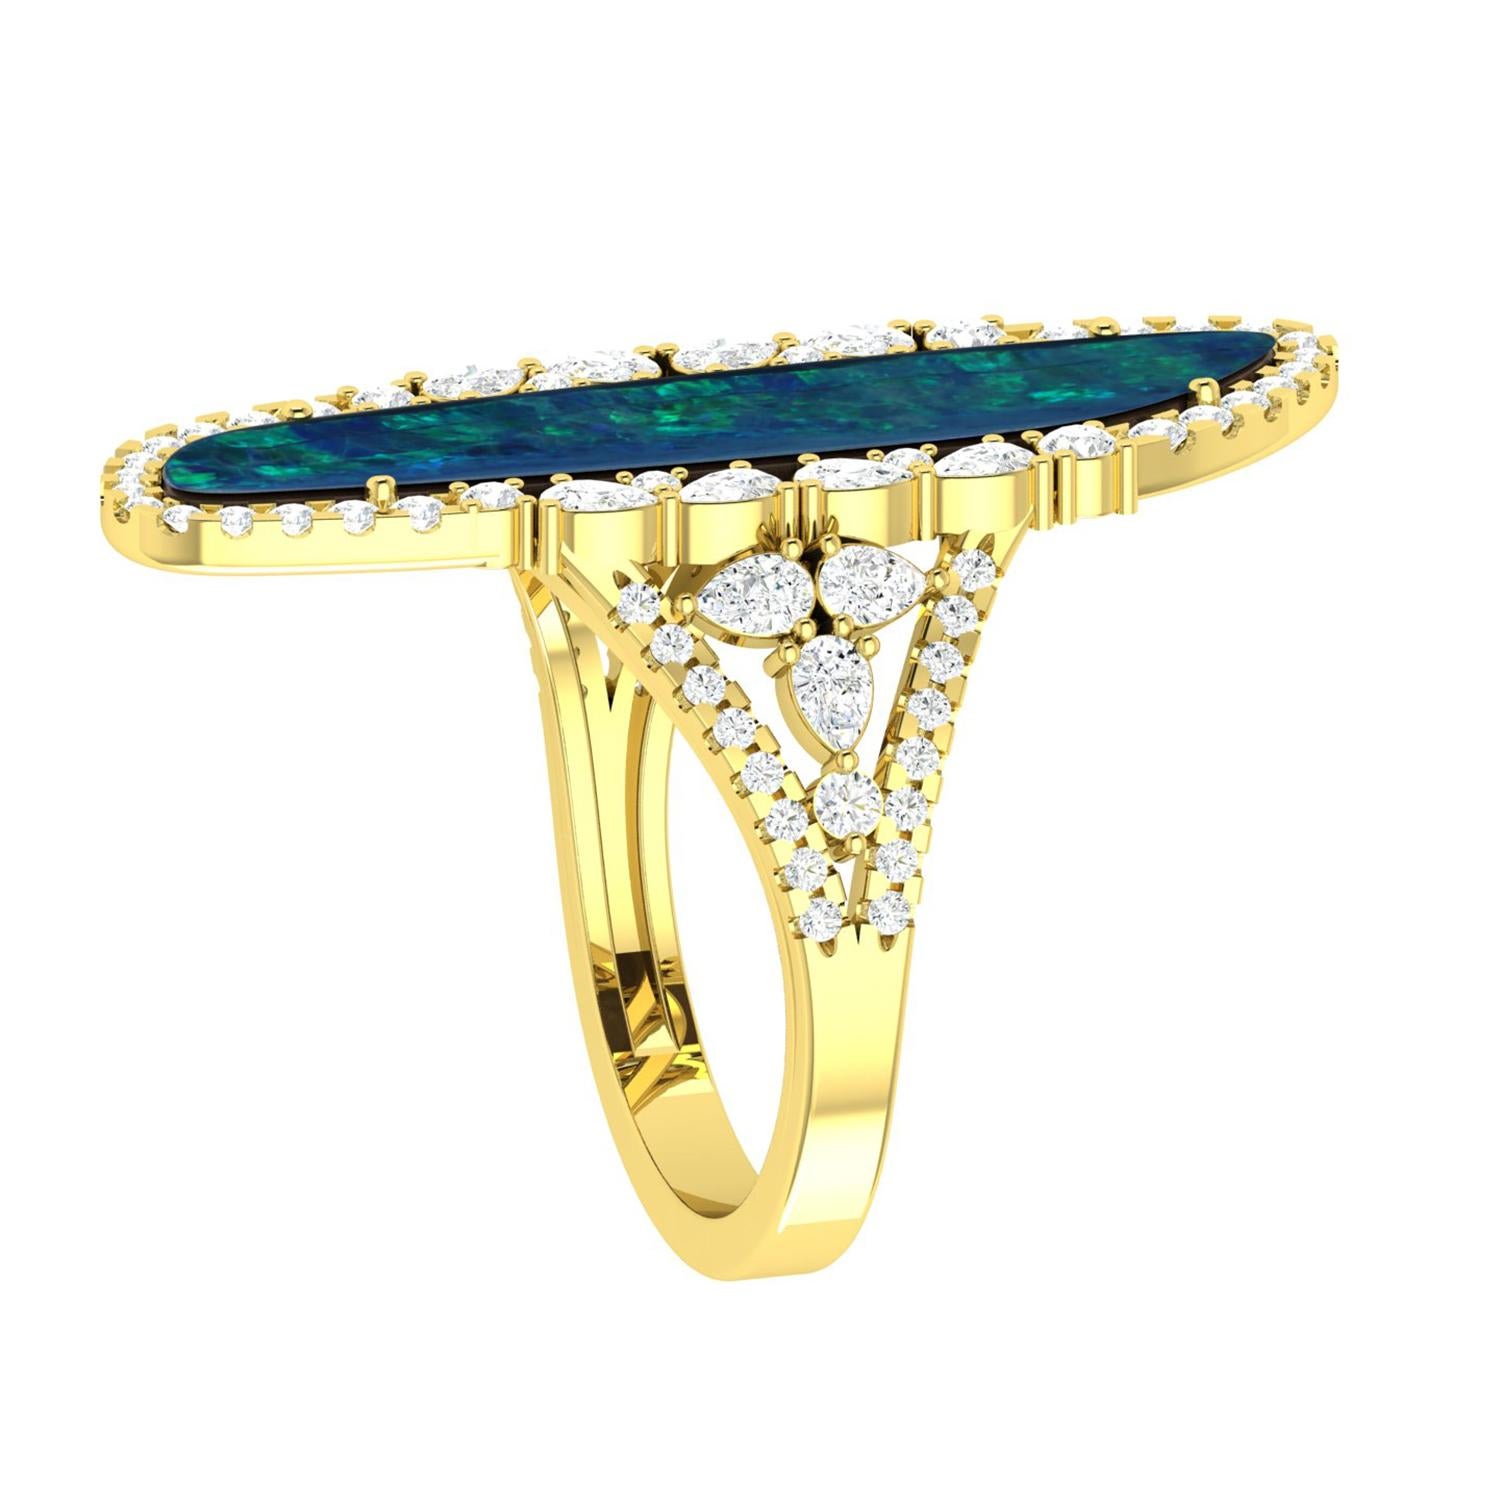 Round Cut 4.35ct Opal Ring With Diamonds Made In 18 Karat Yellow Gold  For Sale